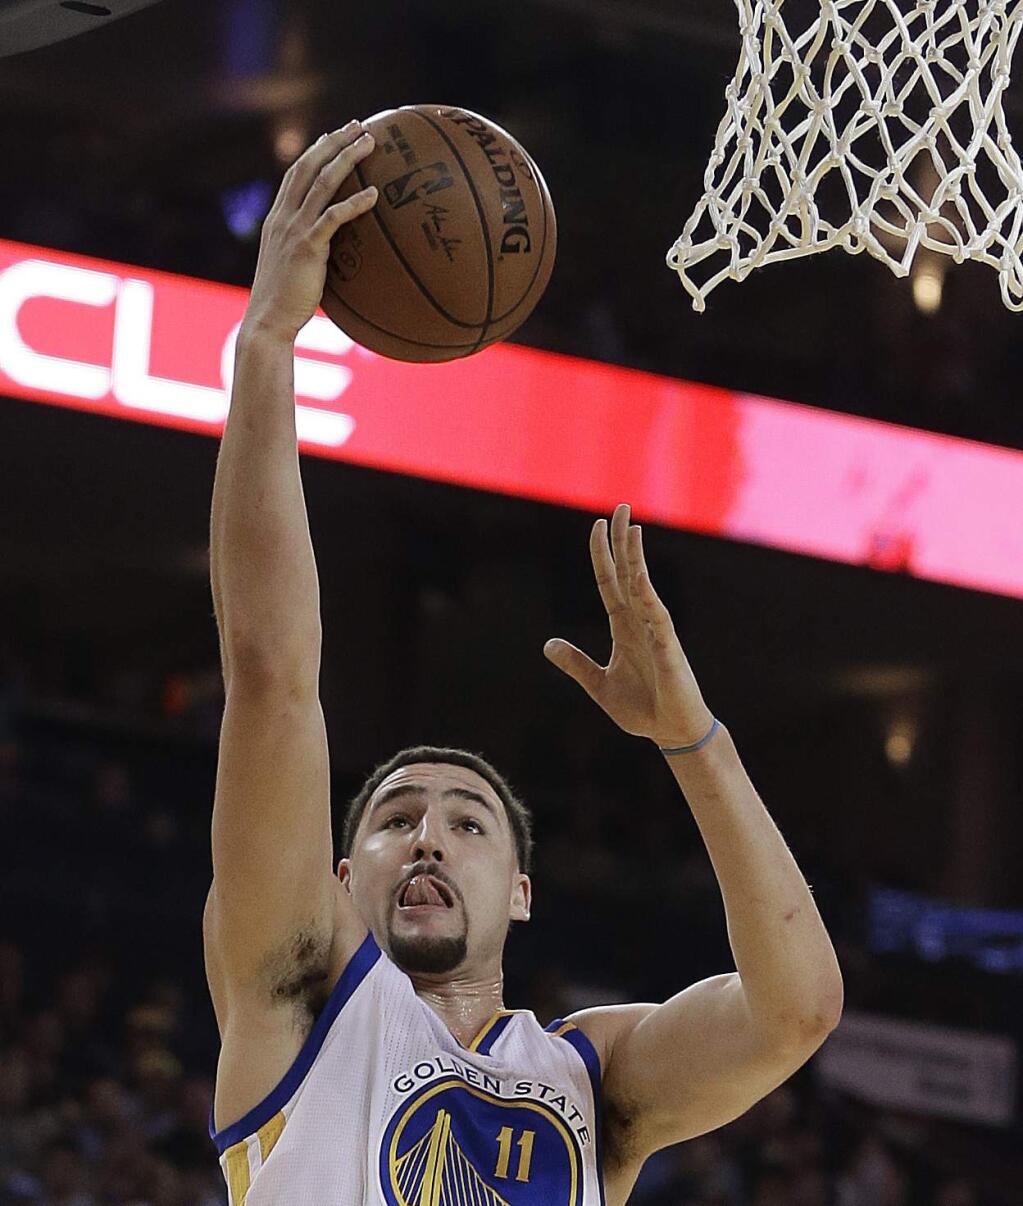 Golden State Warriors' Klay Thompson lays up a shot against the Sacramento Kings during the first half of an NBA basketball game Wednesday, Feb. 15, 2017, in Oakland, Calif. (AP Photo/Ben Margot)